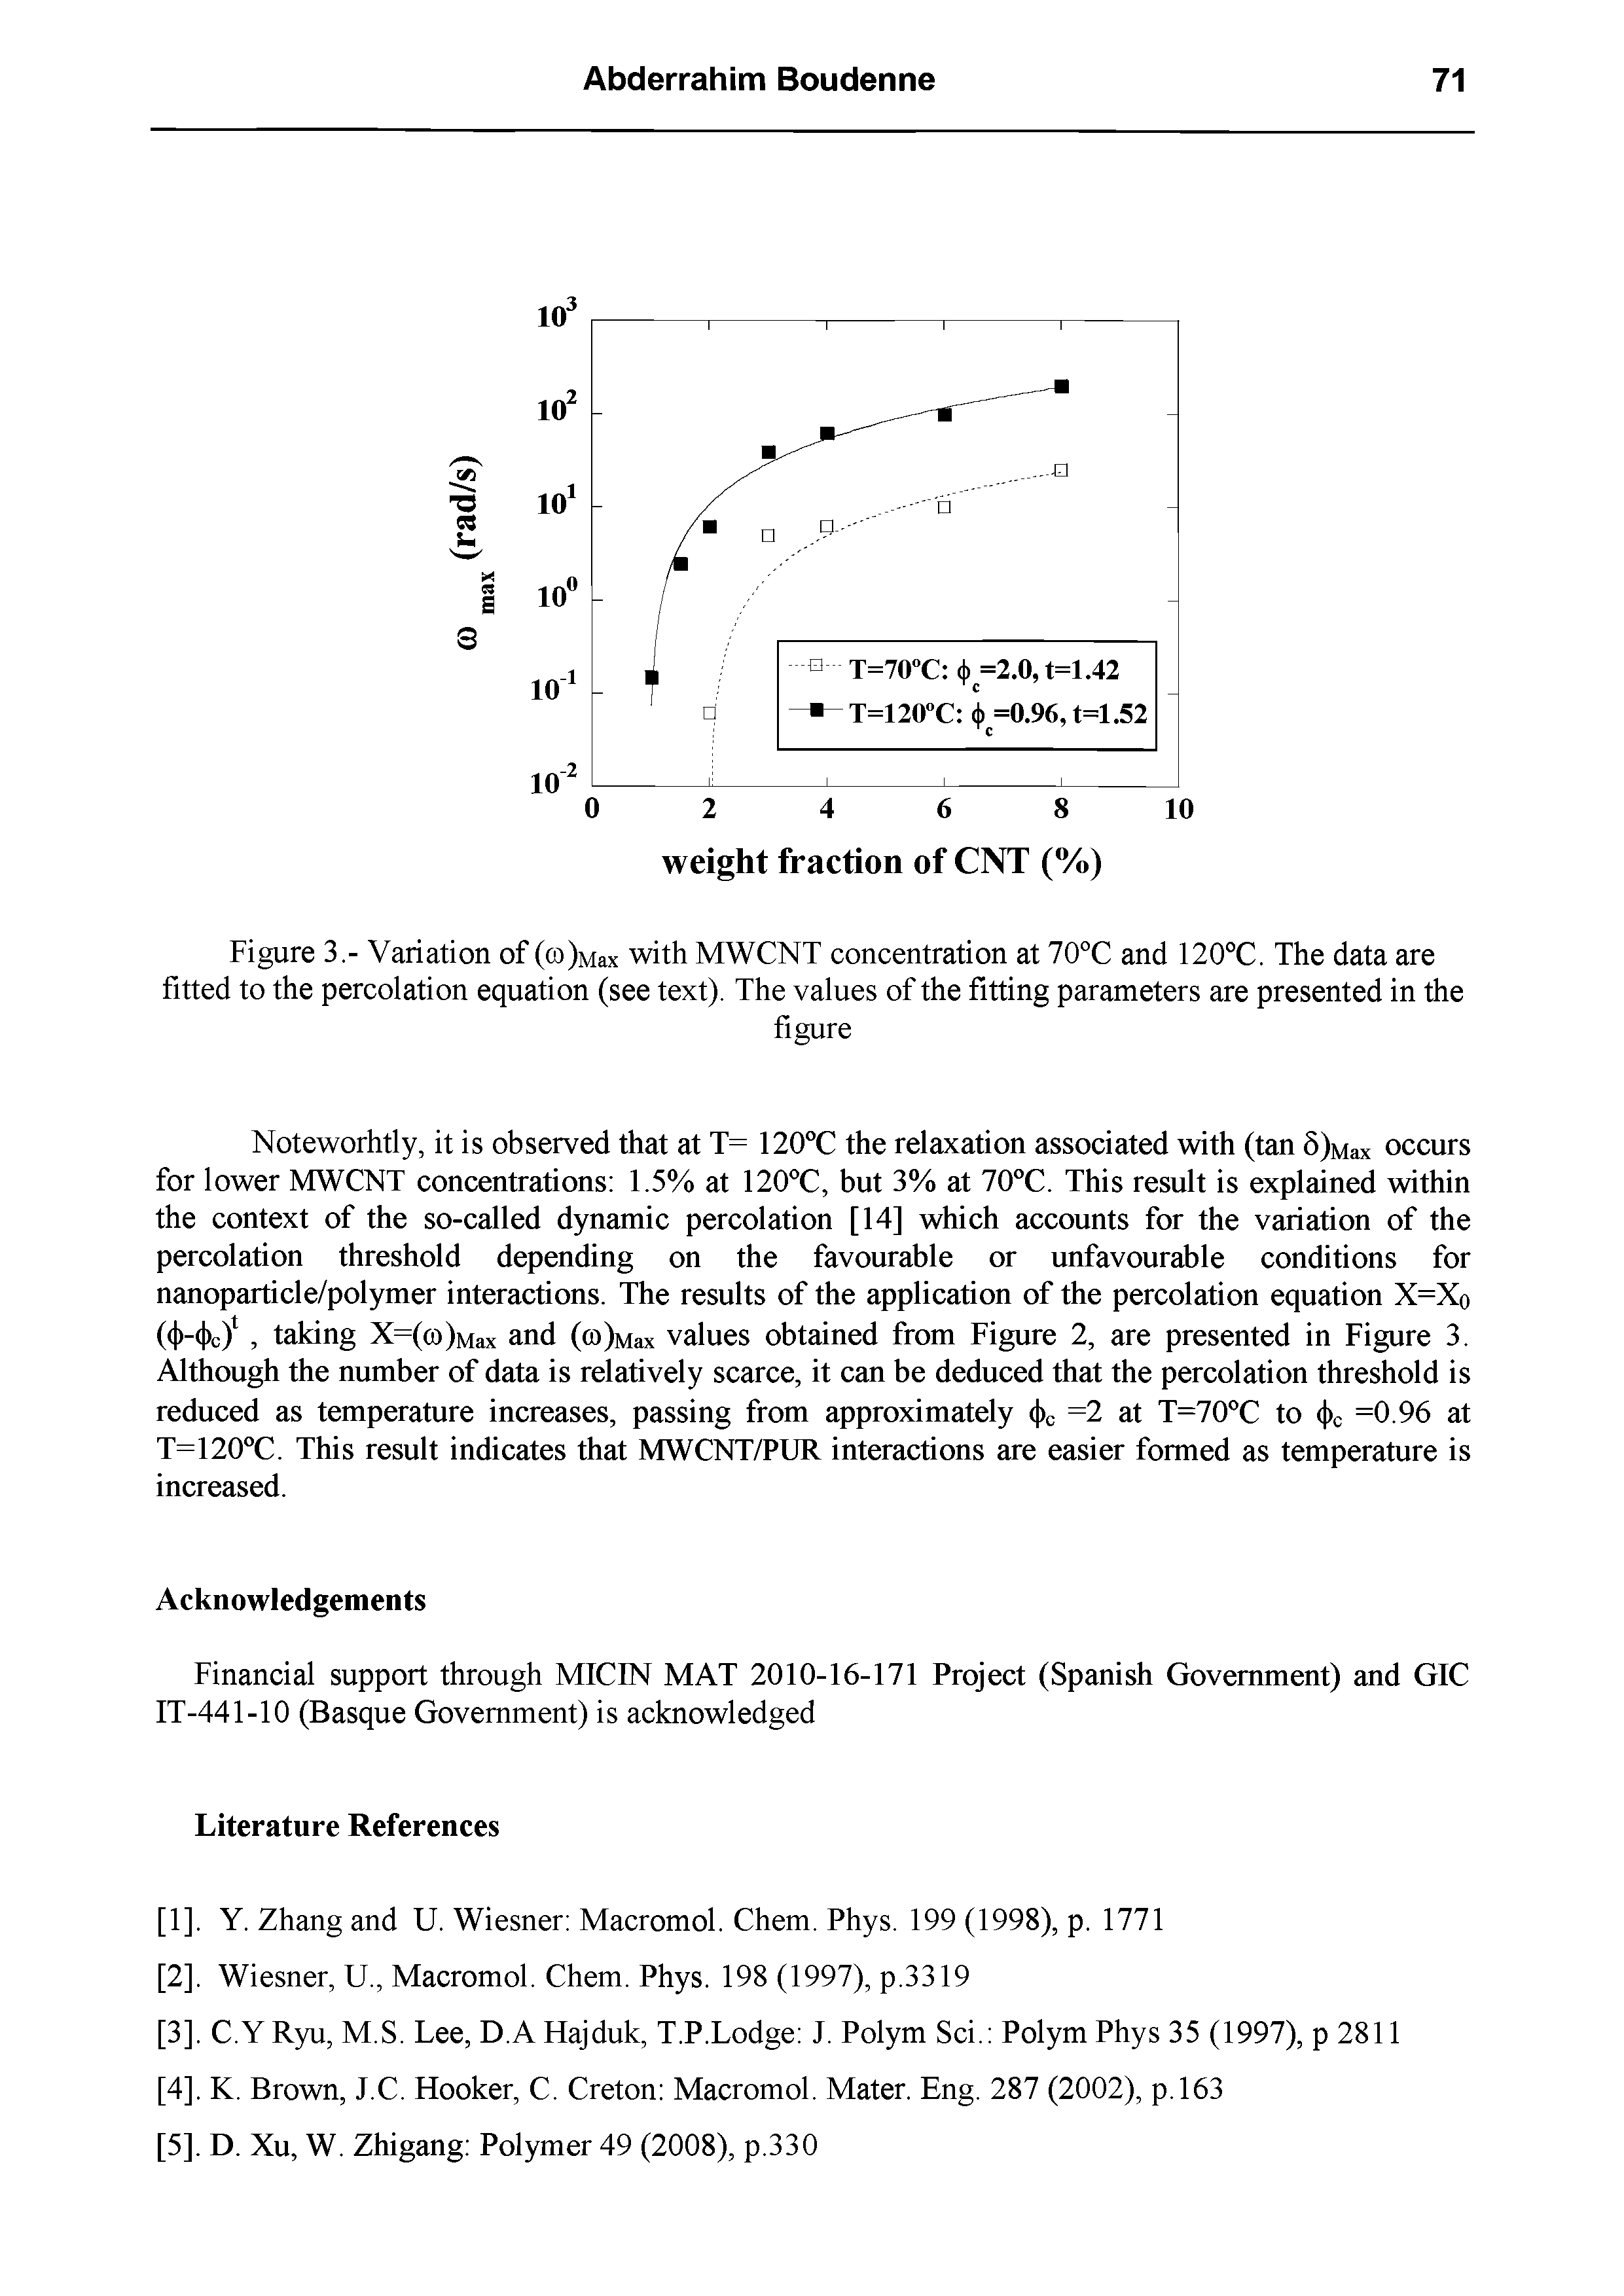 Figure 3.- Variation of (ro)Max with MWCNT concentration at 70°C and 120°C. The data are fitted to the percolation equation (see text). The values of the fitting parameters are presented in the...